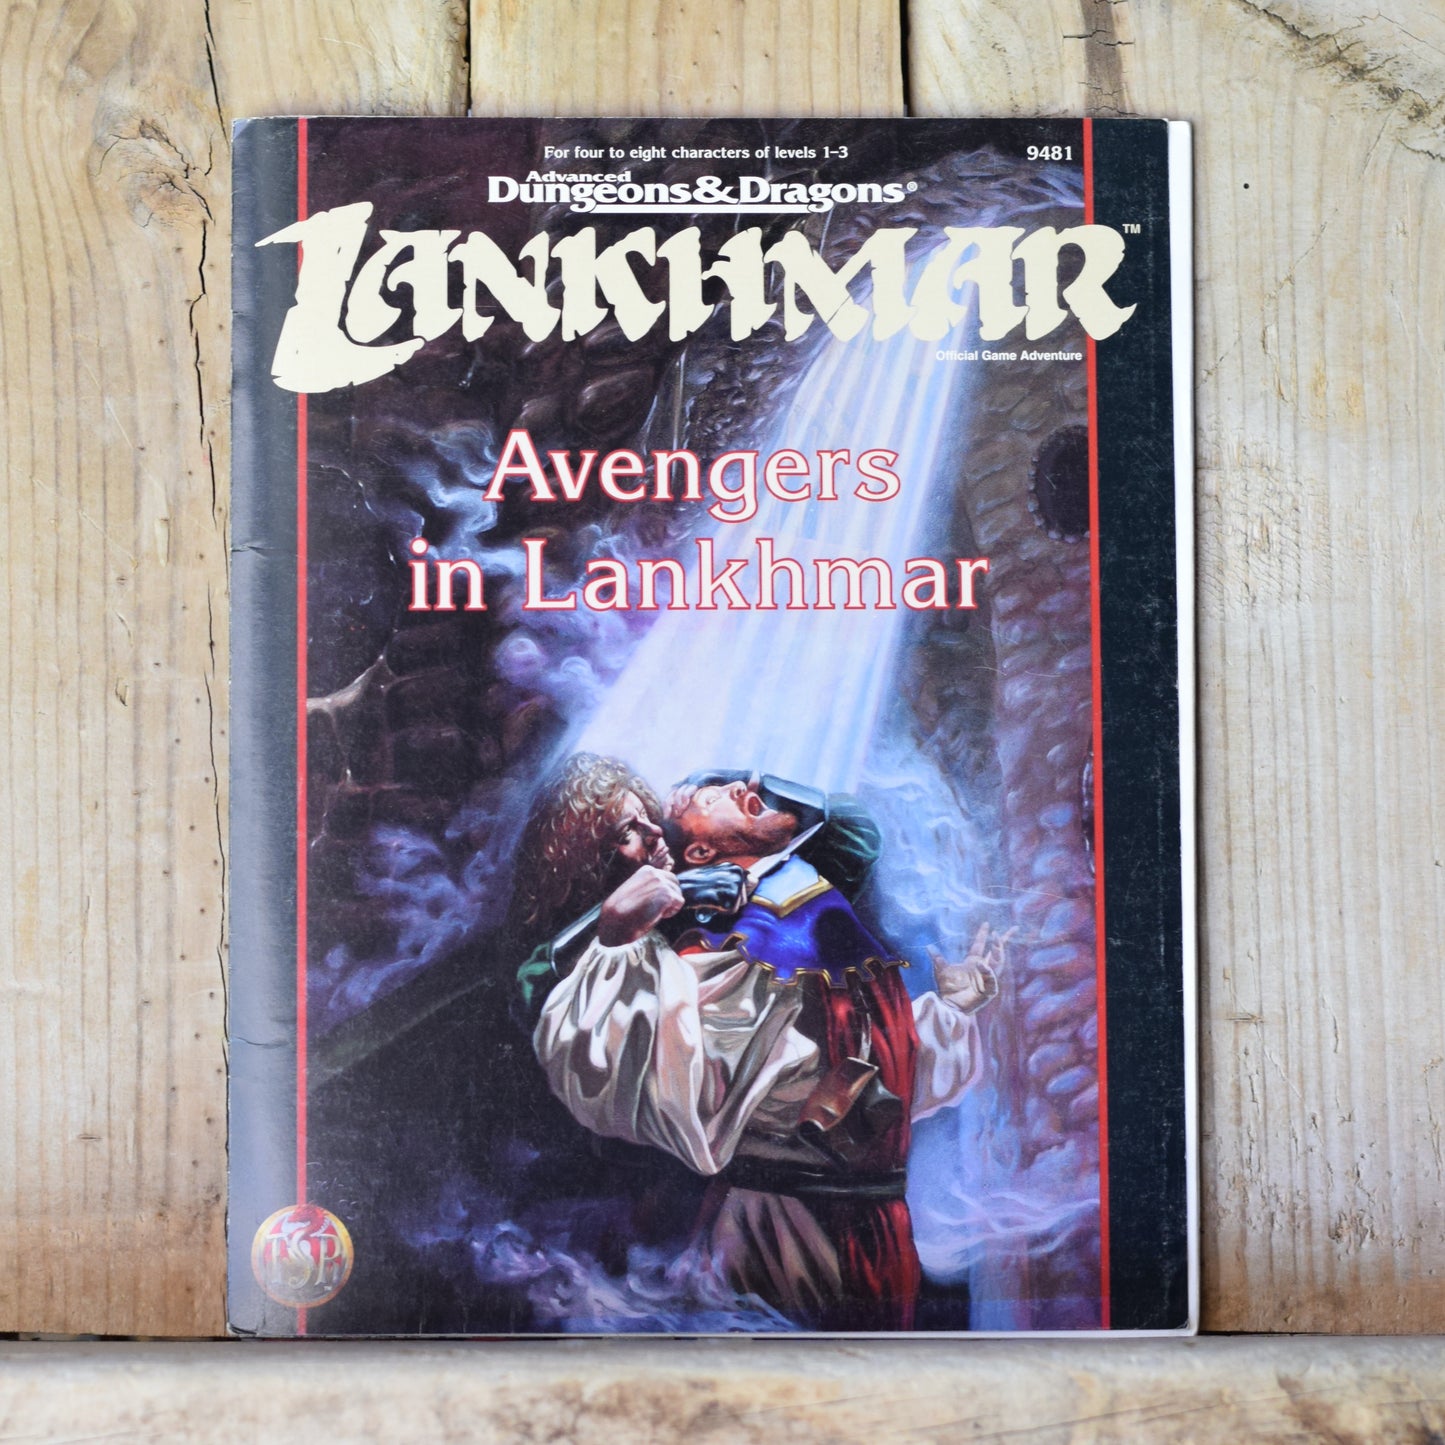 Vintage Dungeons and Dragons RPG Book: AD&D Avengers in Lankhmar Official Adventure